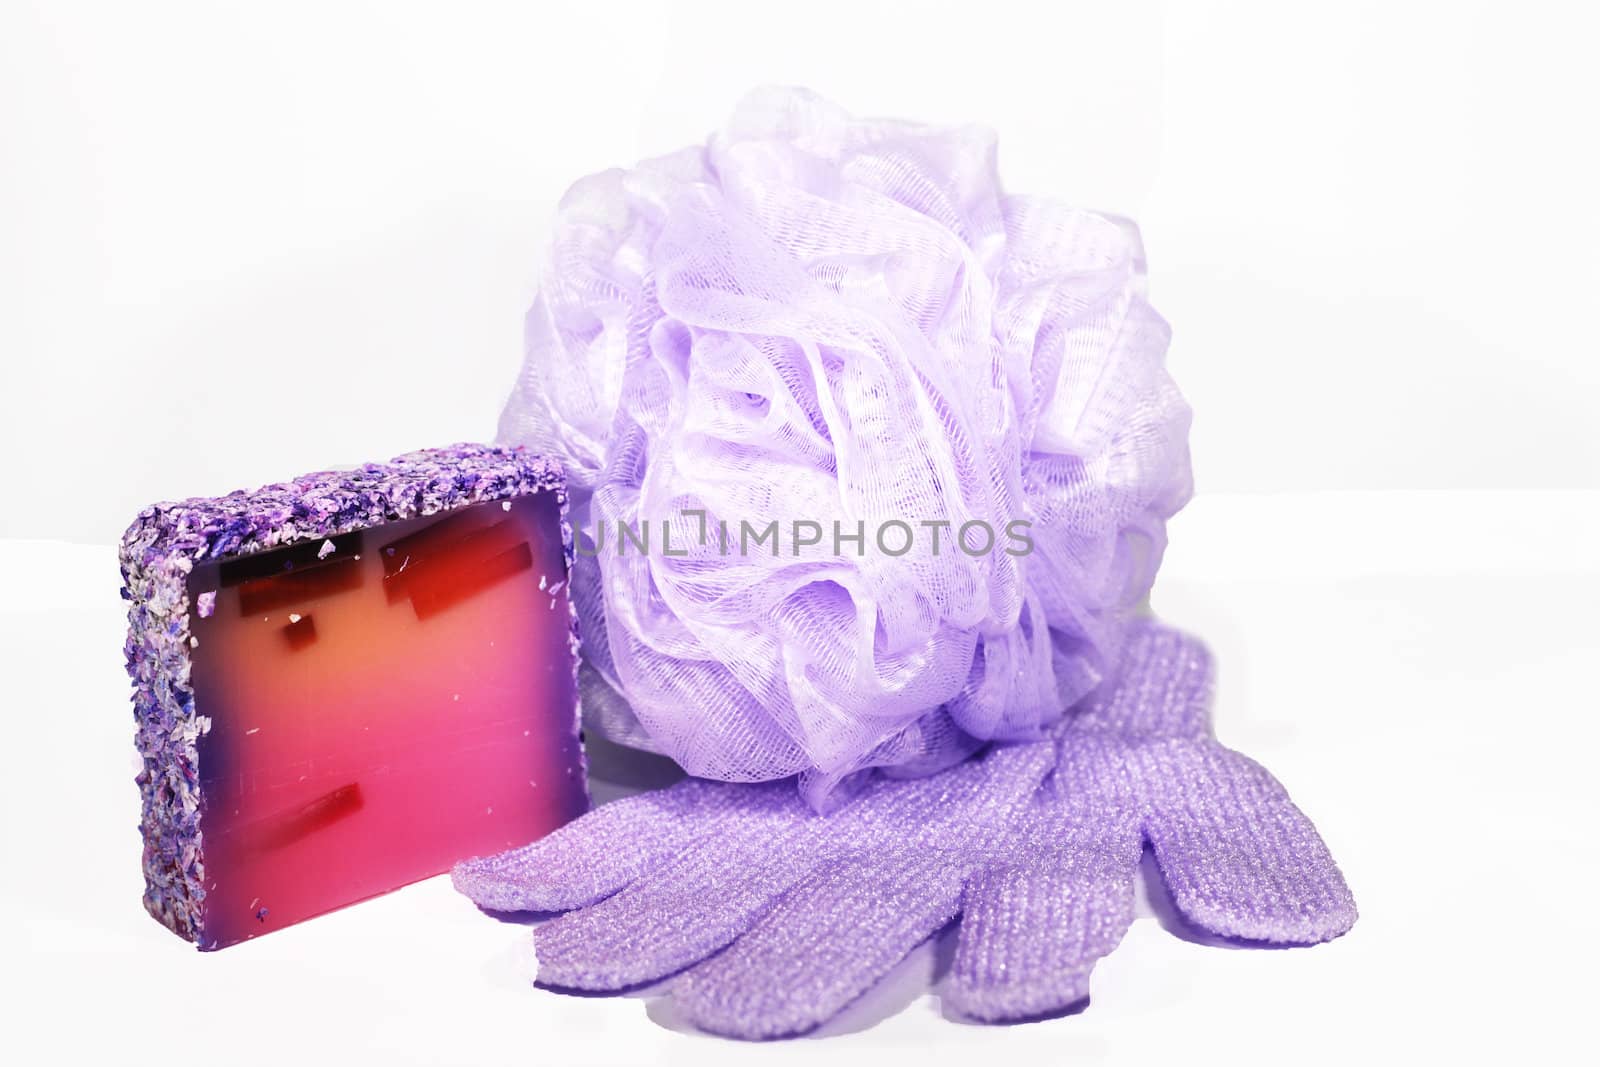 composition of sponge to wash,colored soaps and shampoo  bottle by valentinacarpin